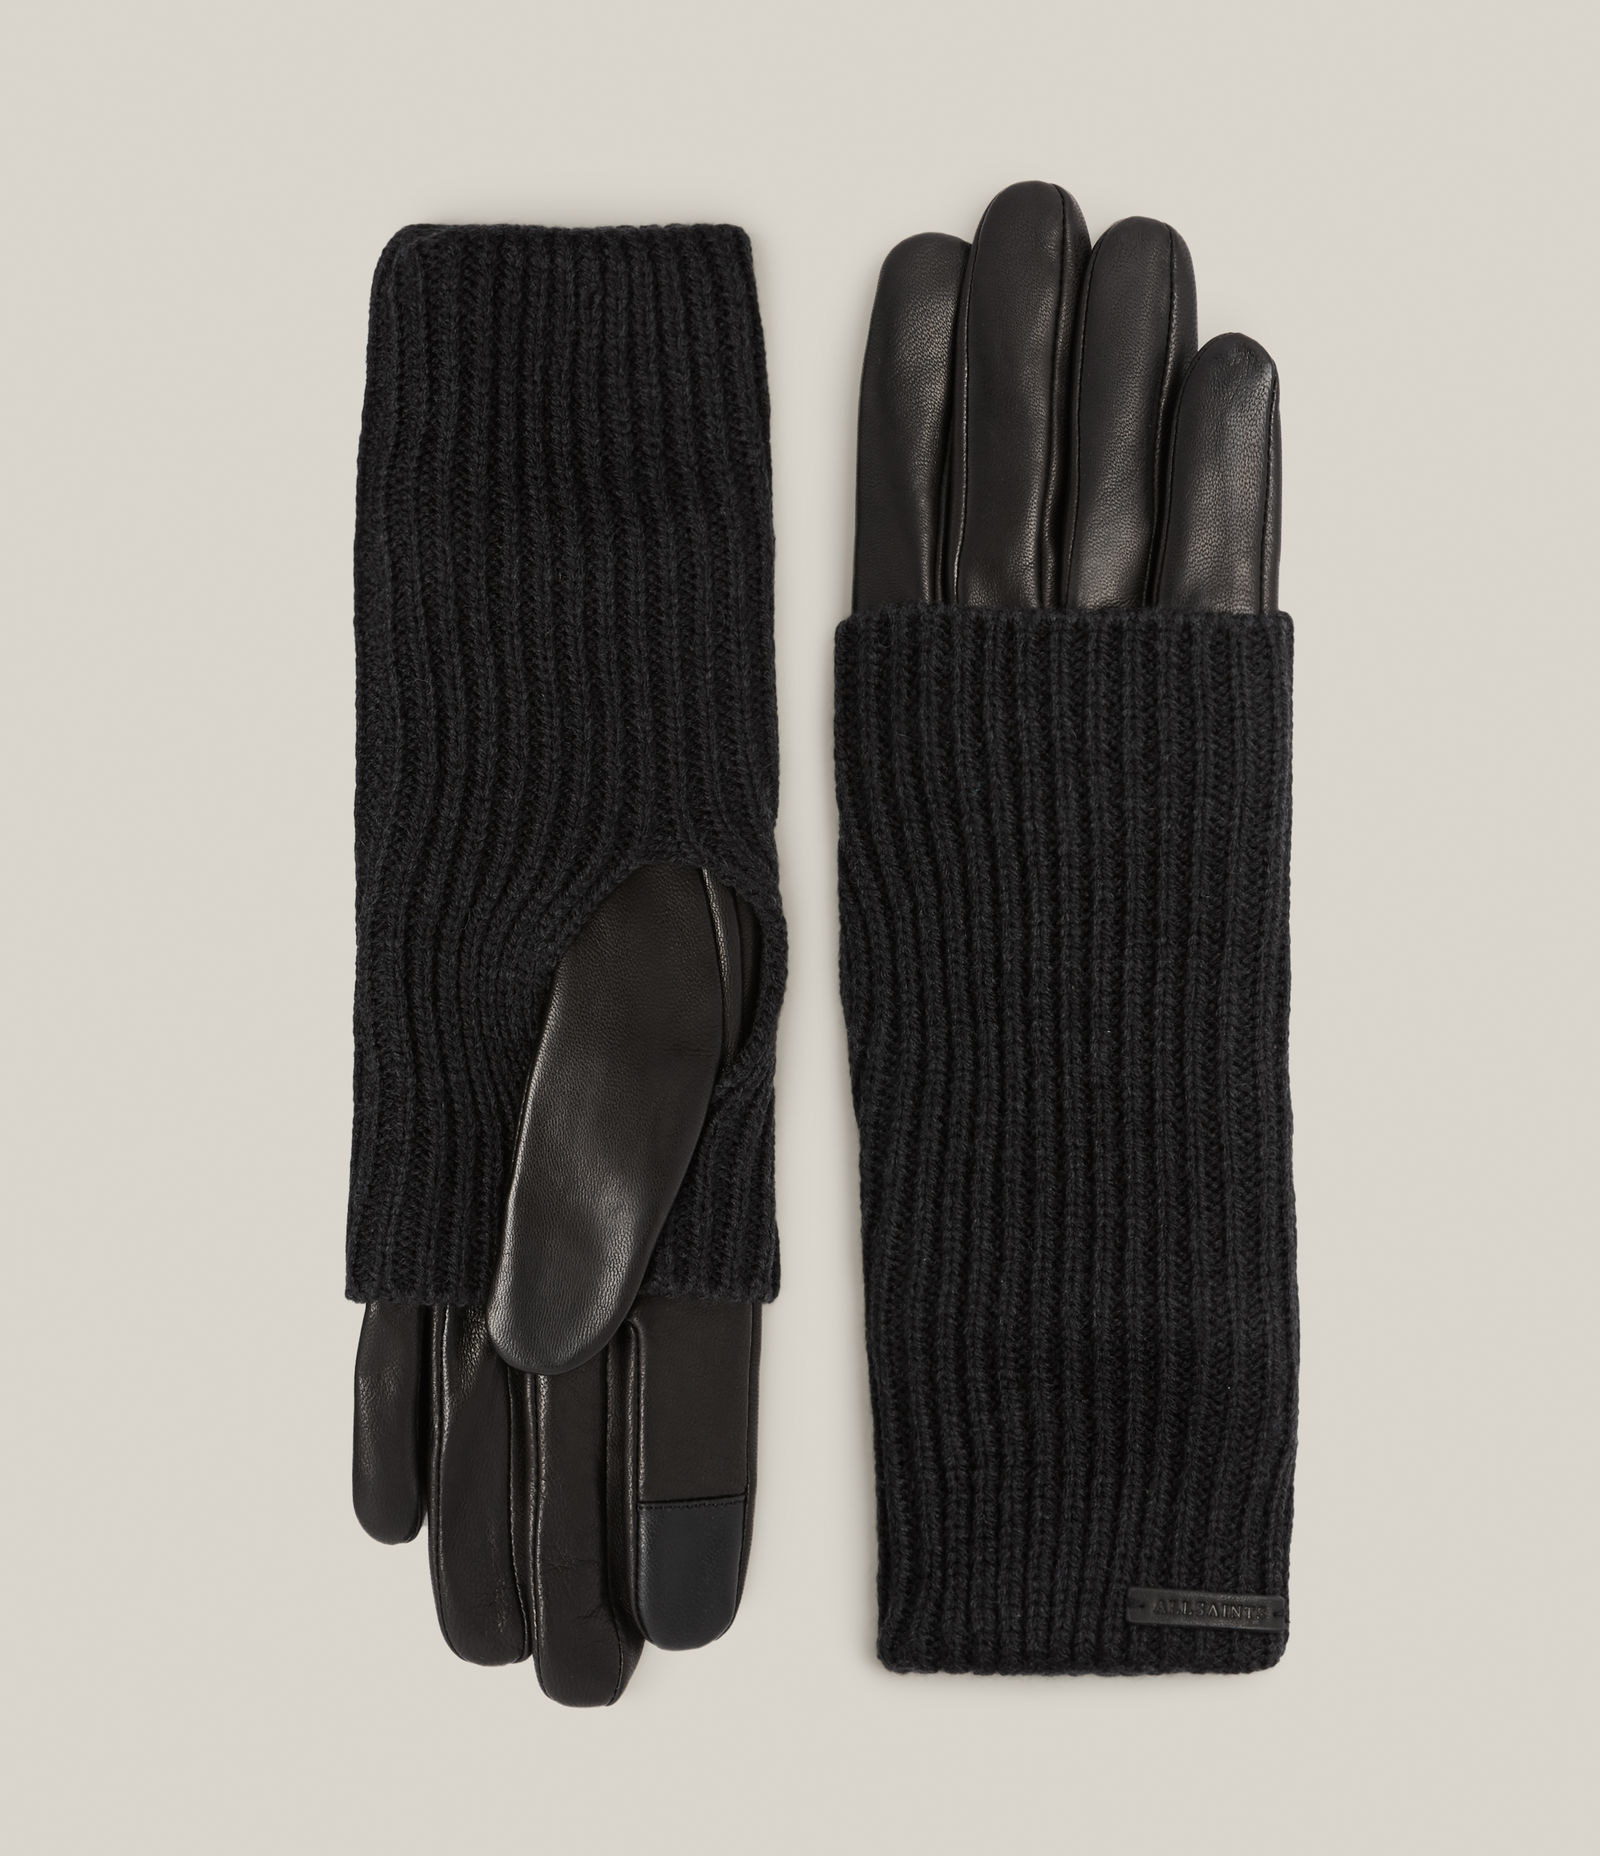 the black knit and black leather gloves